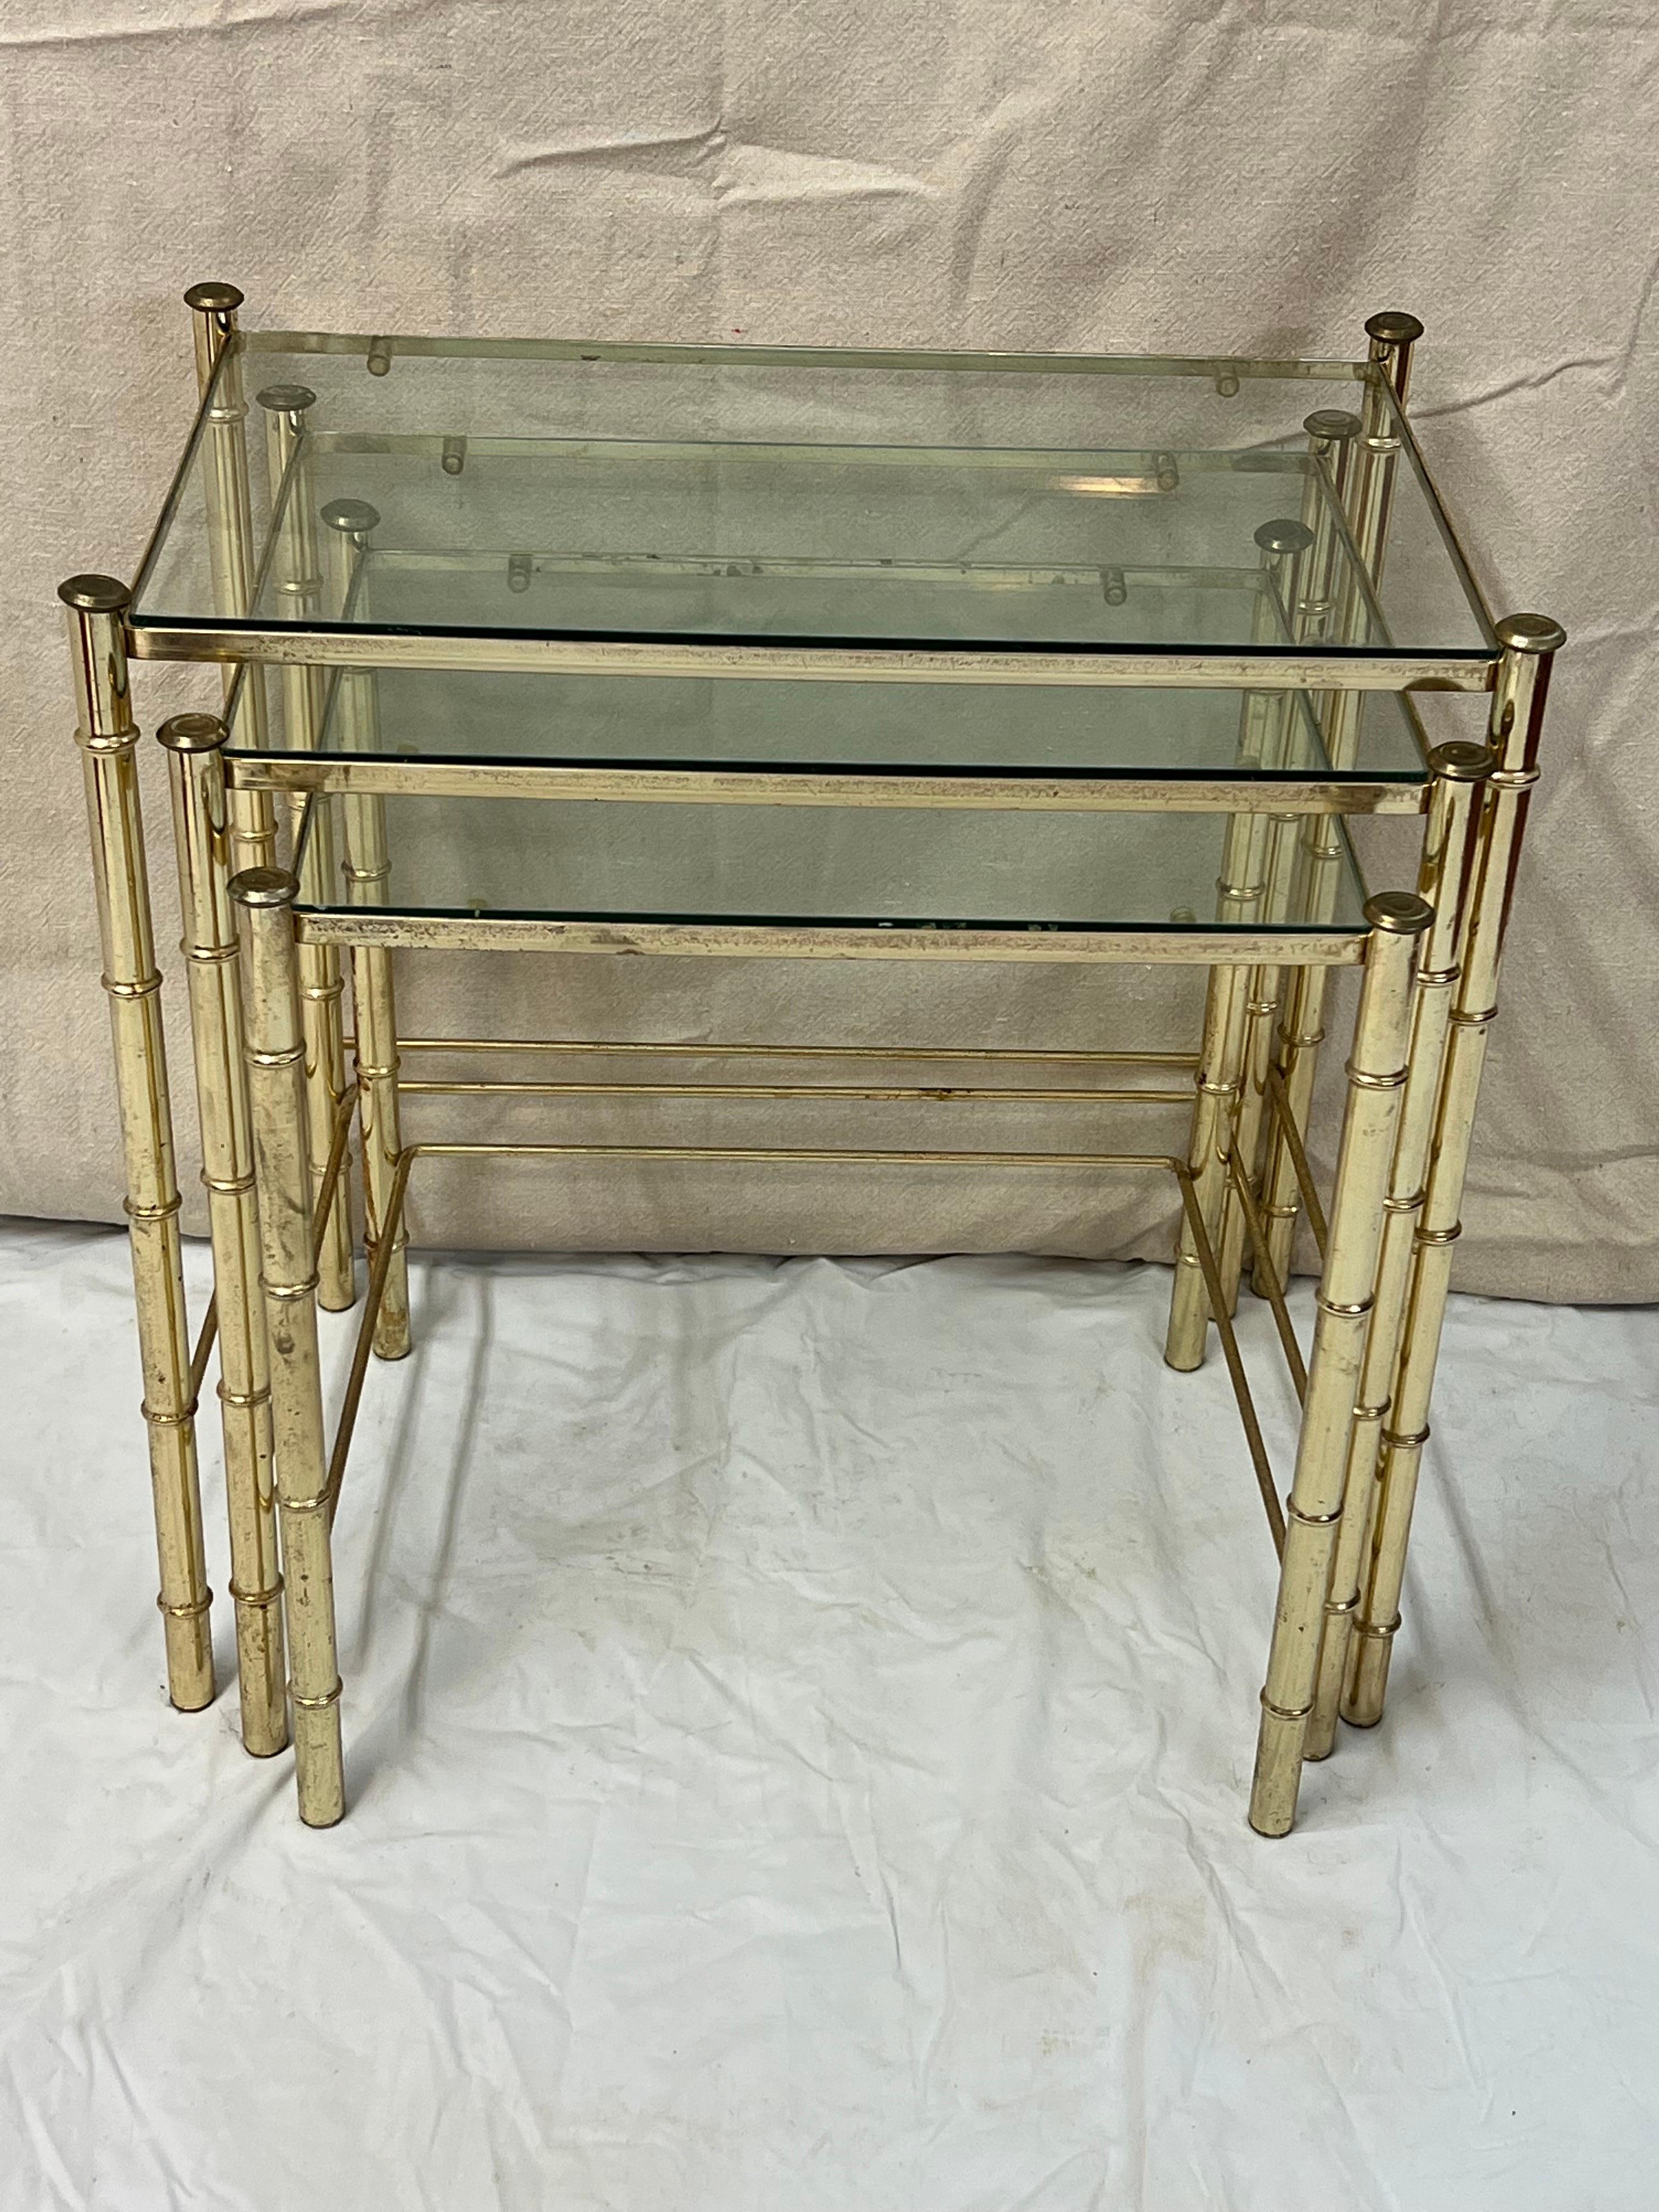 Set of Faux Bamboo Brass nesting Tables. Three total with clear glass. Perfect for small spaces. Use together or use apart. Some pitting to the brass plated finish. This item can parcel ship in the continental US for under $100